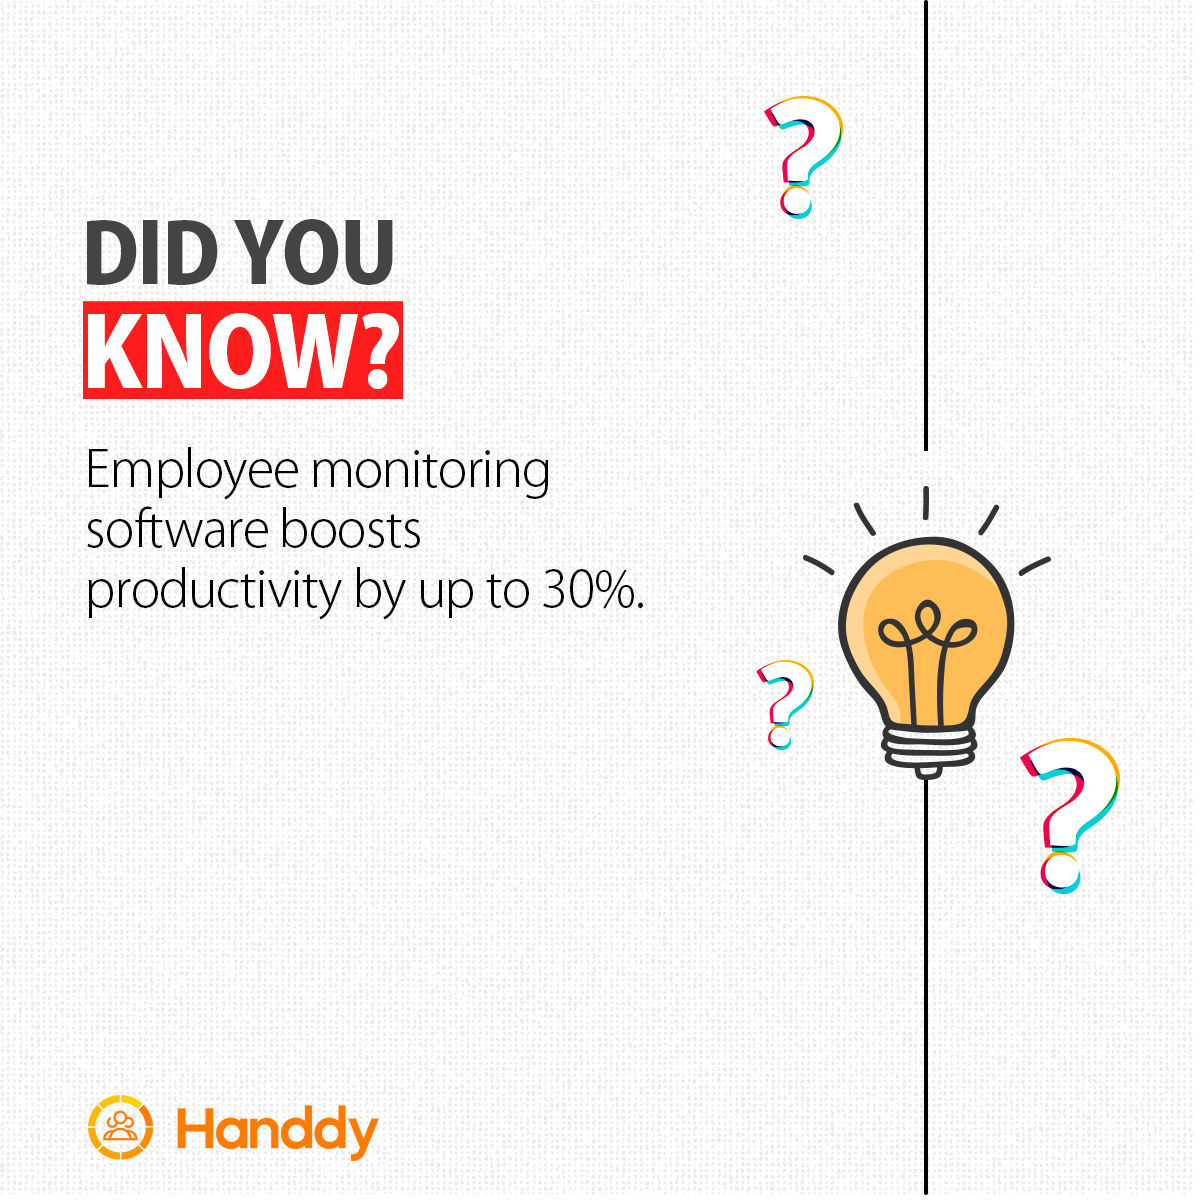 Harness the power of Handdy employee monitoring software and effortlessly increase your workplace productivity by 30%. ✅Contact us today! handdy.com . . . #Handdy #Employeemonitoringsoftware #Employeeproductivity #Employeemonitoring #Productivitytrackingsoftware